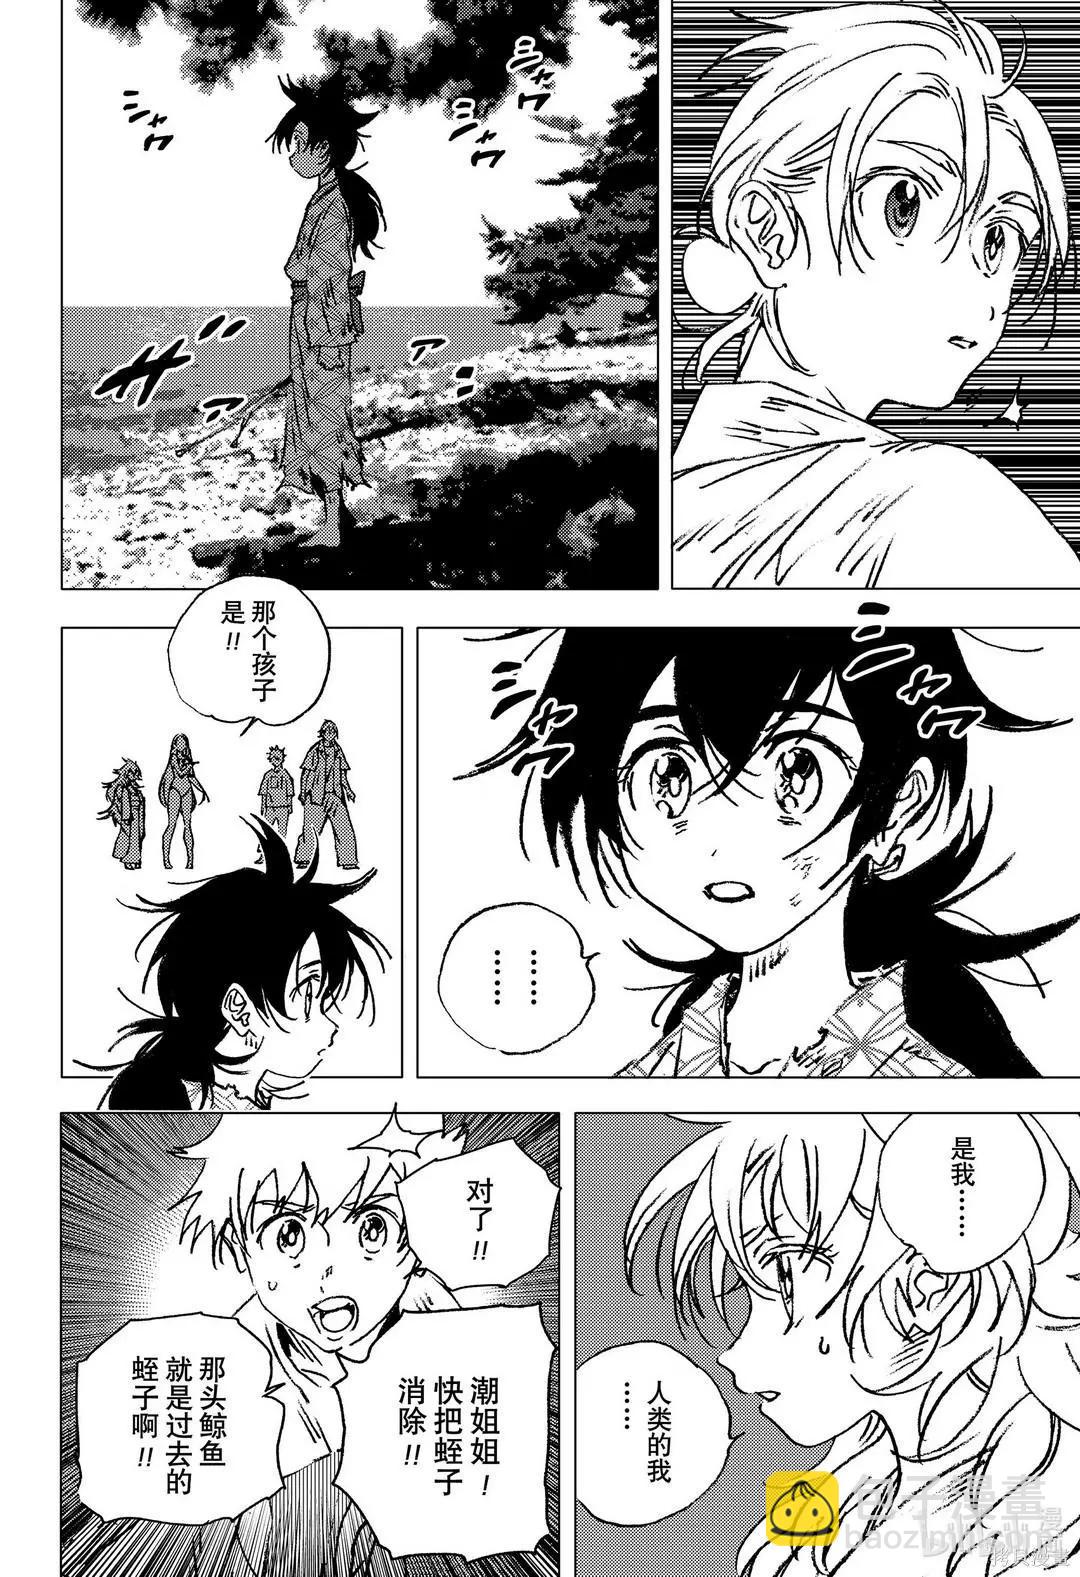 Summer time rendering - 第138話 - 2